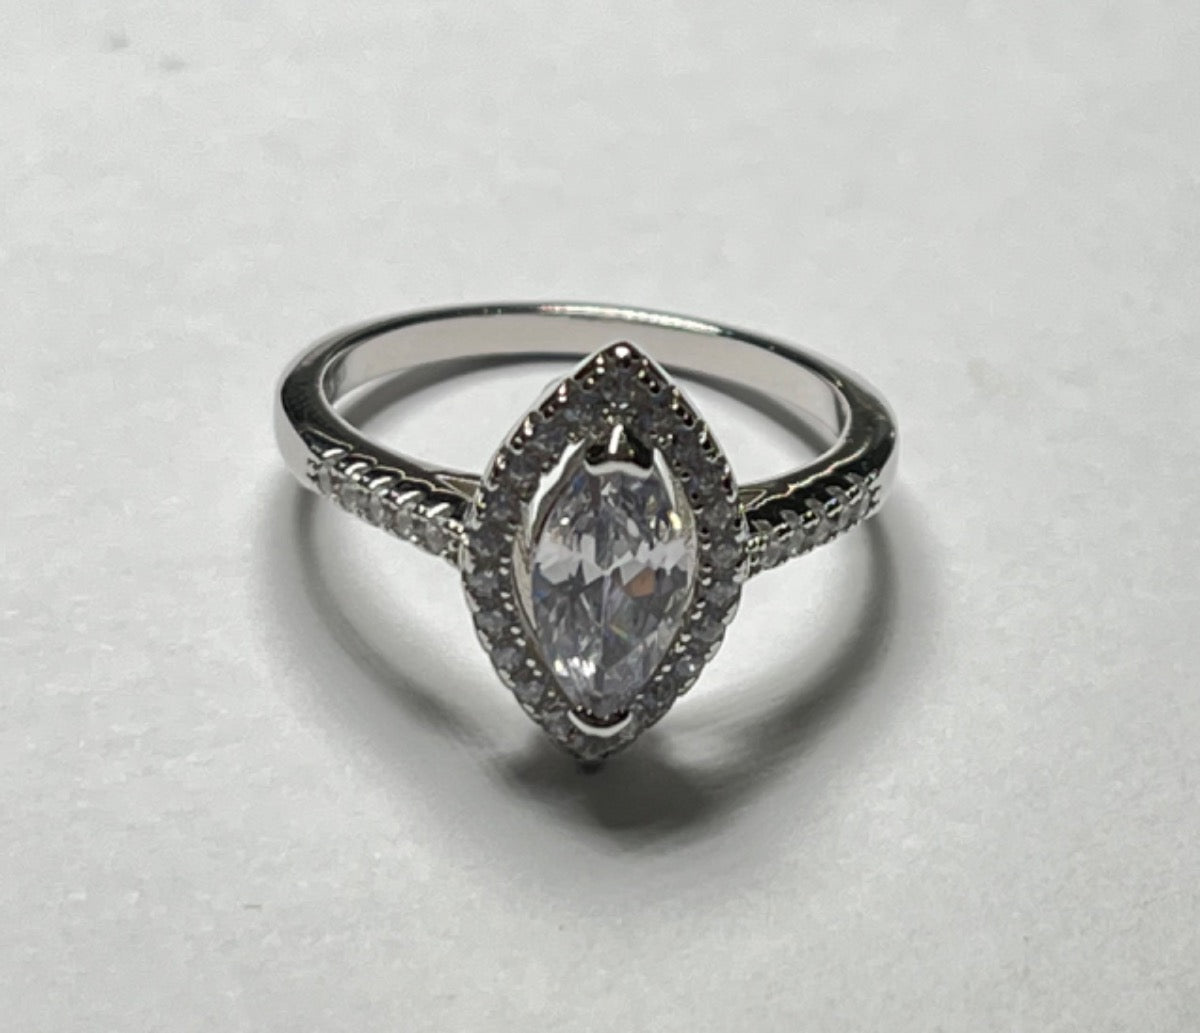 Silver  Engagement Ring with CZ